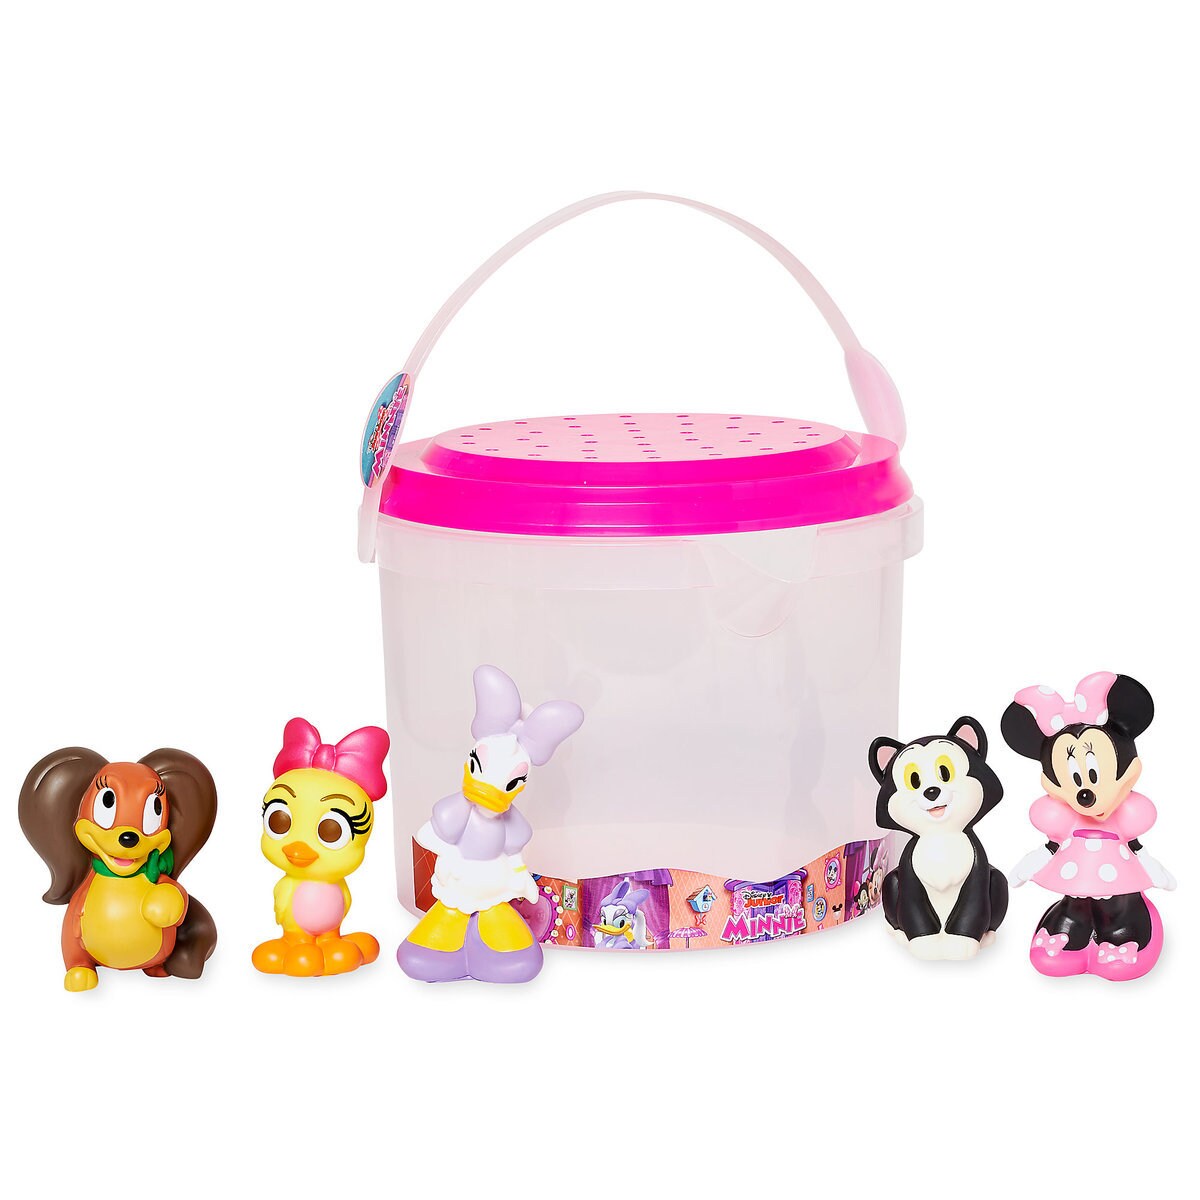 Top 25 Disney Gift Ideas for Babies featured by top US Disney blogger, Marcie and the Mouse: https://lumiere-a.akamaihd.net/v1/images/file_bcd4501a.jpeg?width=1200&region=0%2C0%2C2000%2C2000